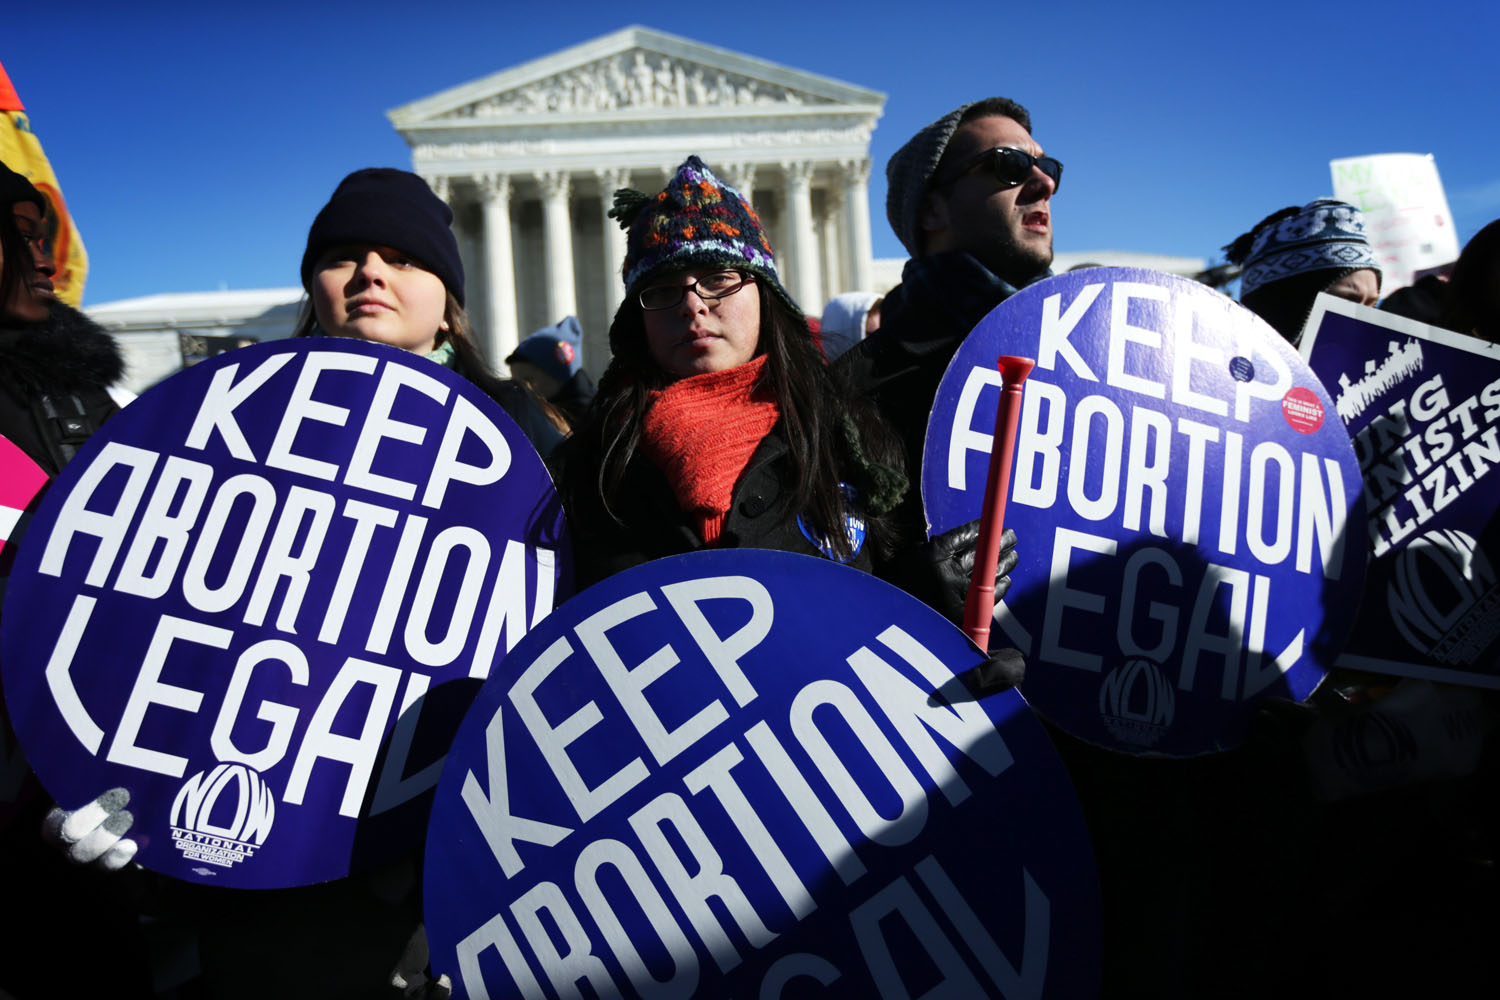 Pro-choice activists hold signs as marchers of the annual March for Life arrive in front of the U.S. Supreme Court Jan. 22, 2014 on Capitol Hill in Washington, D.C. (Alex Wong&mdash;Getty Images)